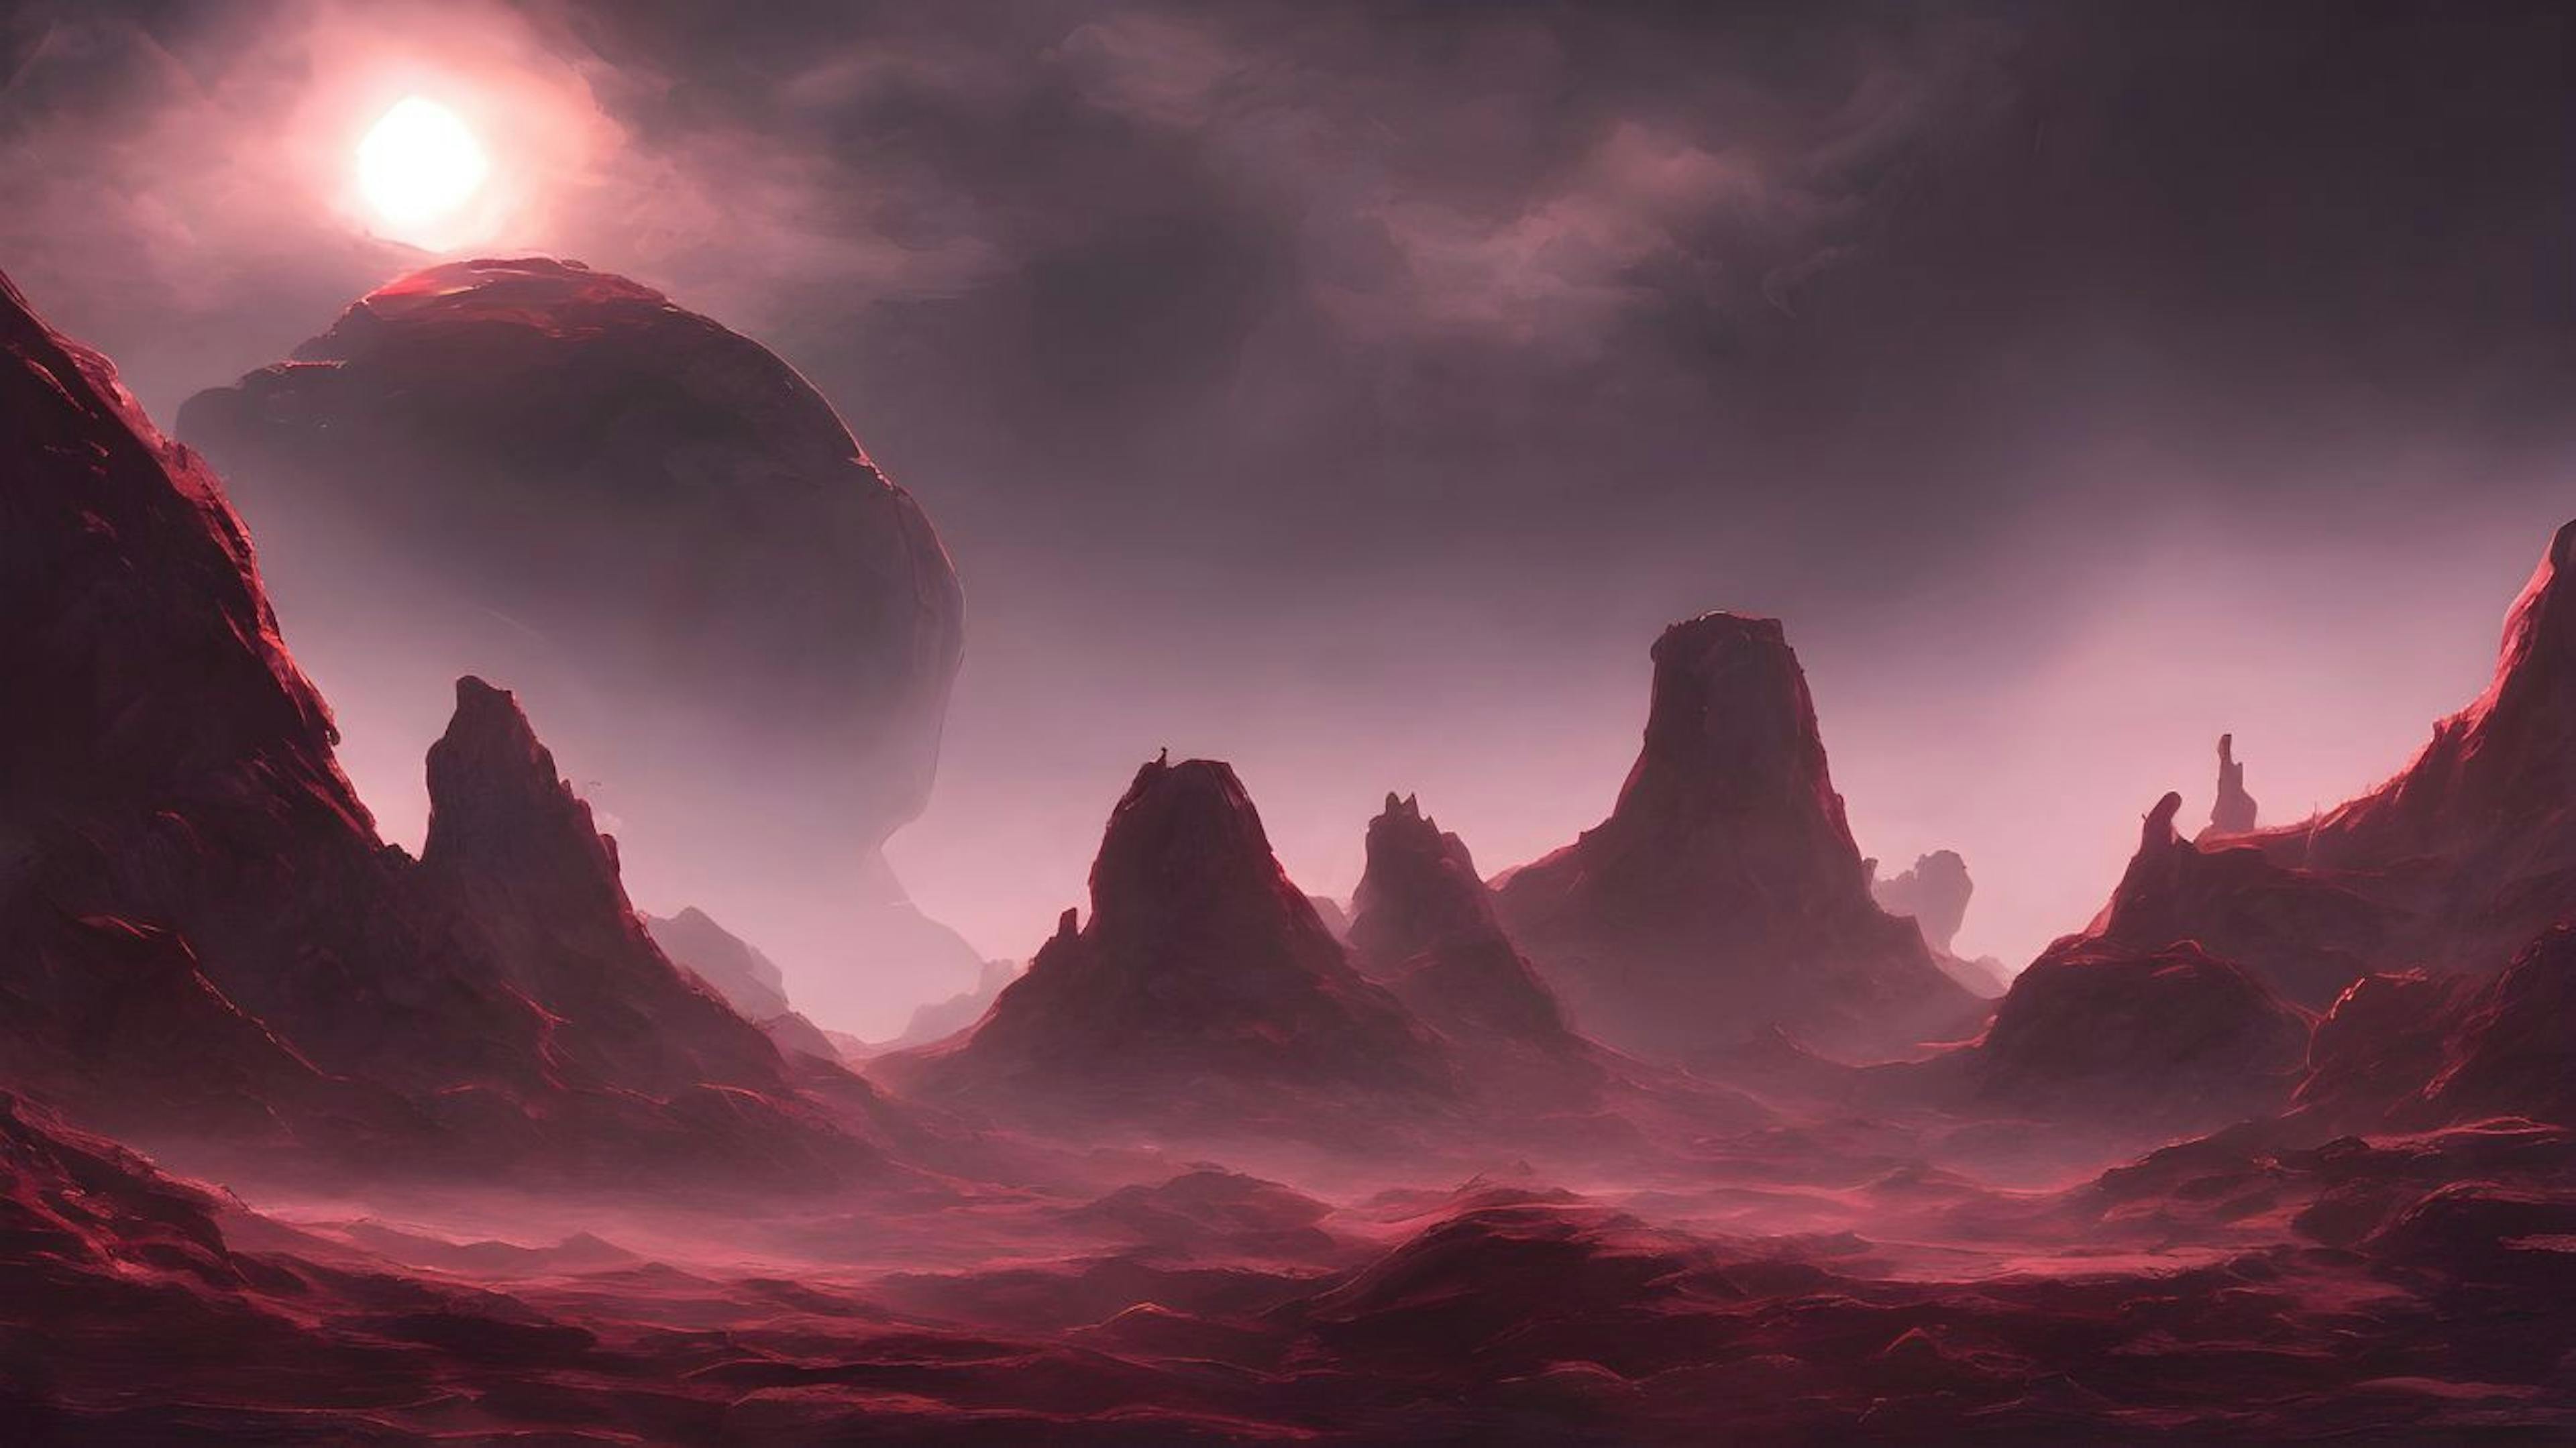 Image: Predicted Alien Planet Generated by AI